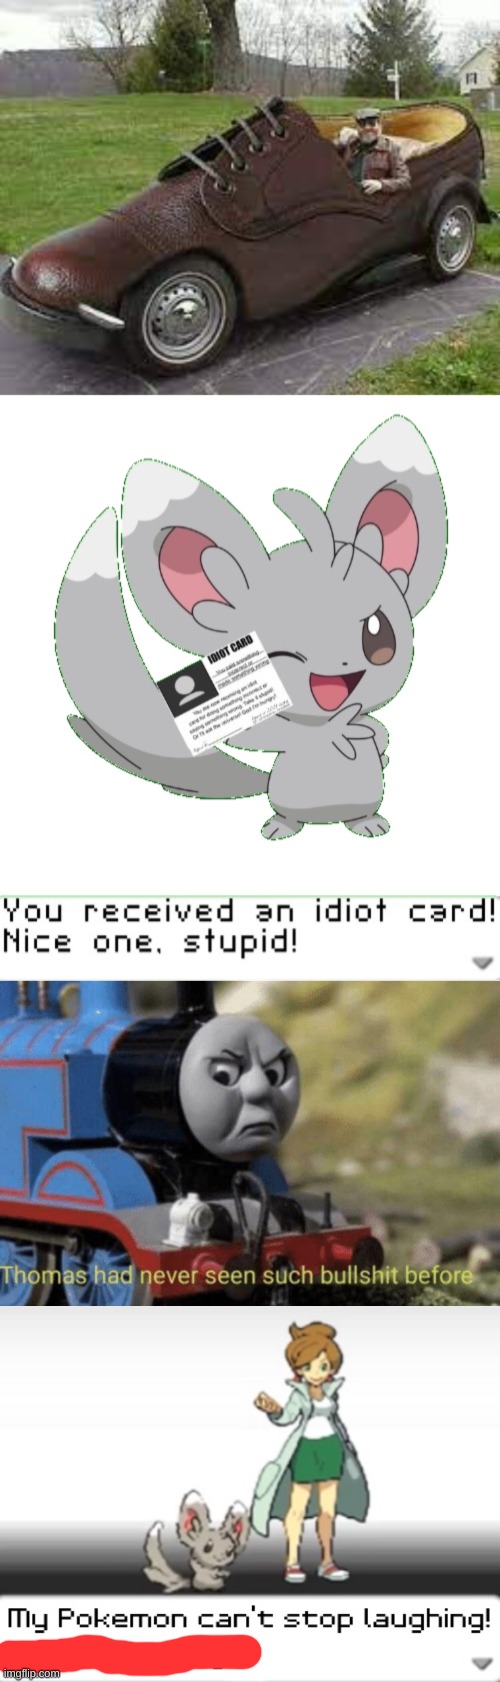 what is this anyway LOL | image tagged in you received an idiot card,thomas had never seen such bullshit before,my pokemon can't stop laughing you are wrong,shoe car | made w/ Imgflip meme maker